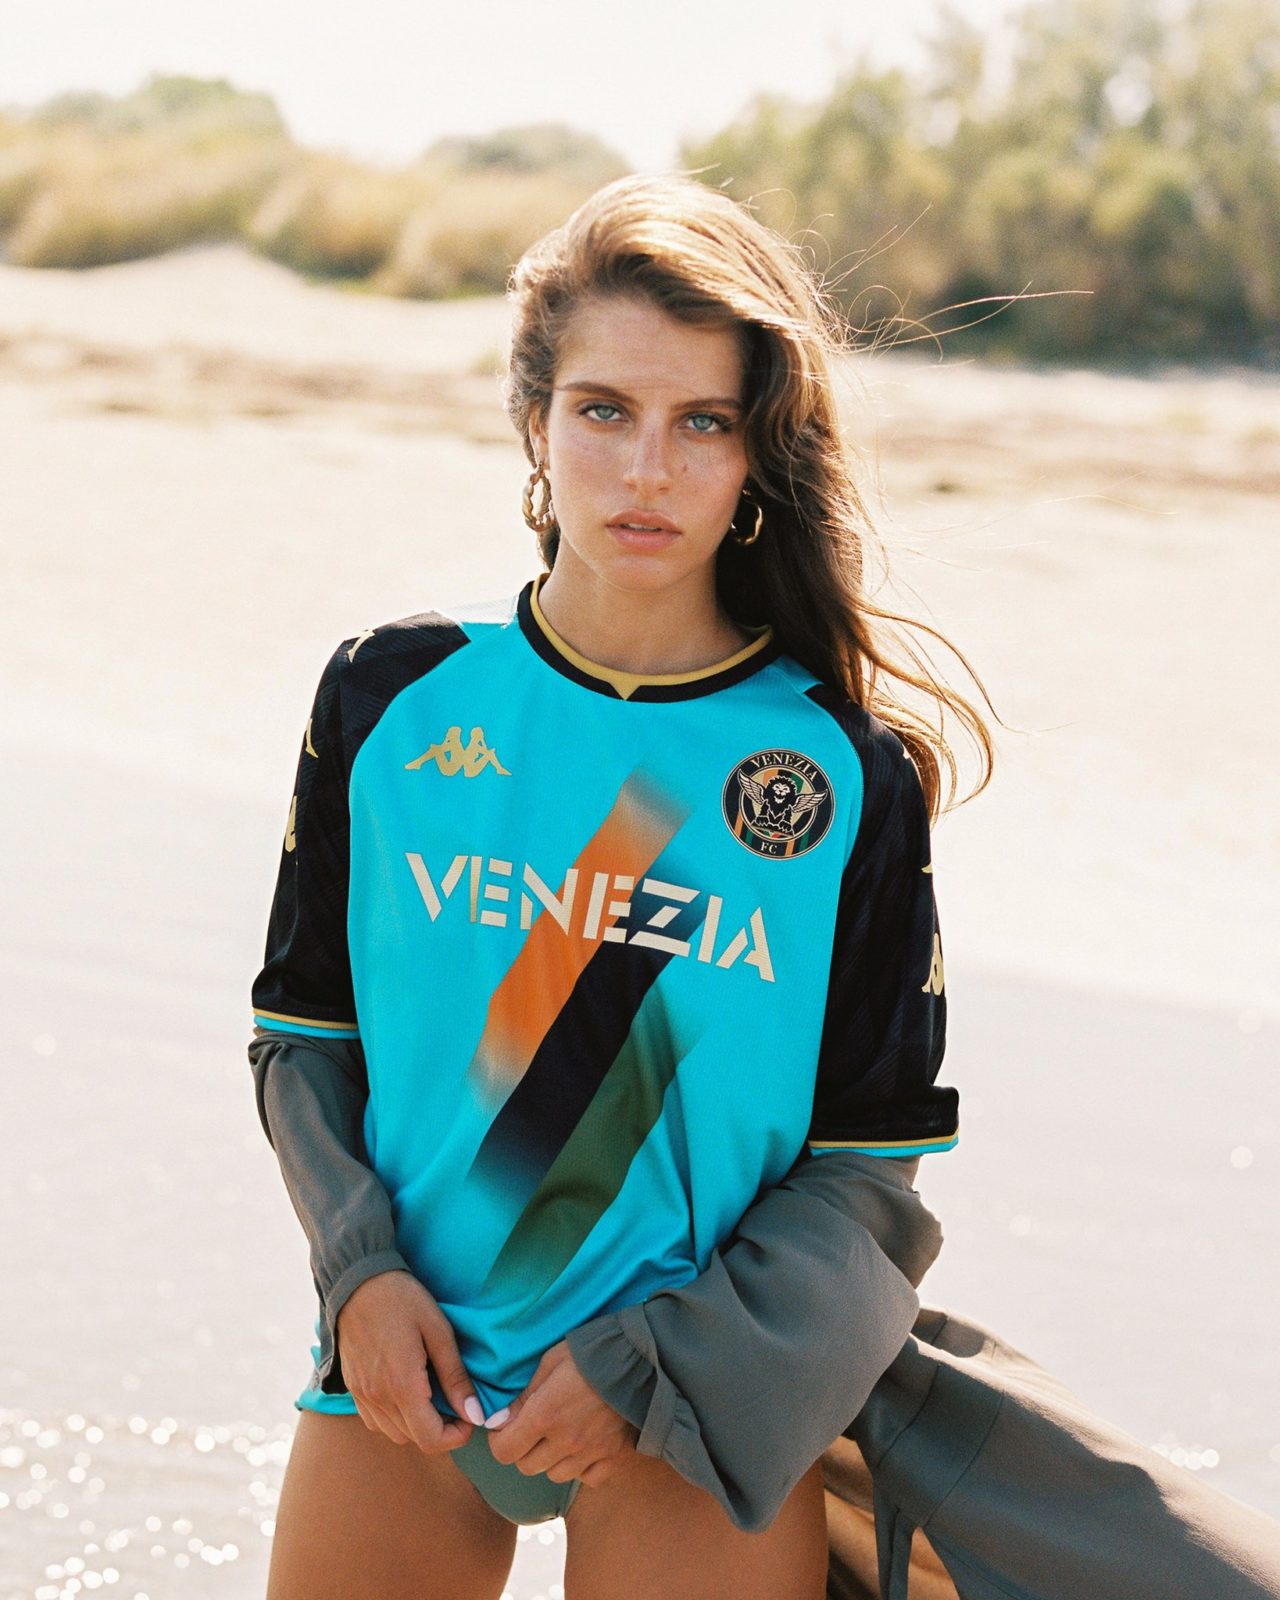 Venezia third kit inspired by and protects the lagoon - Football